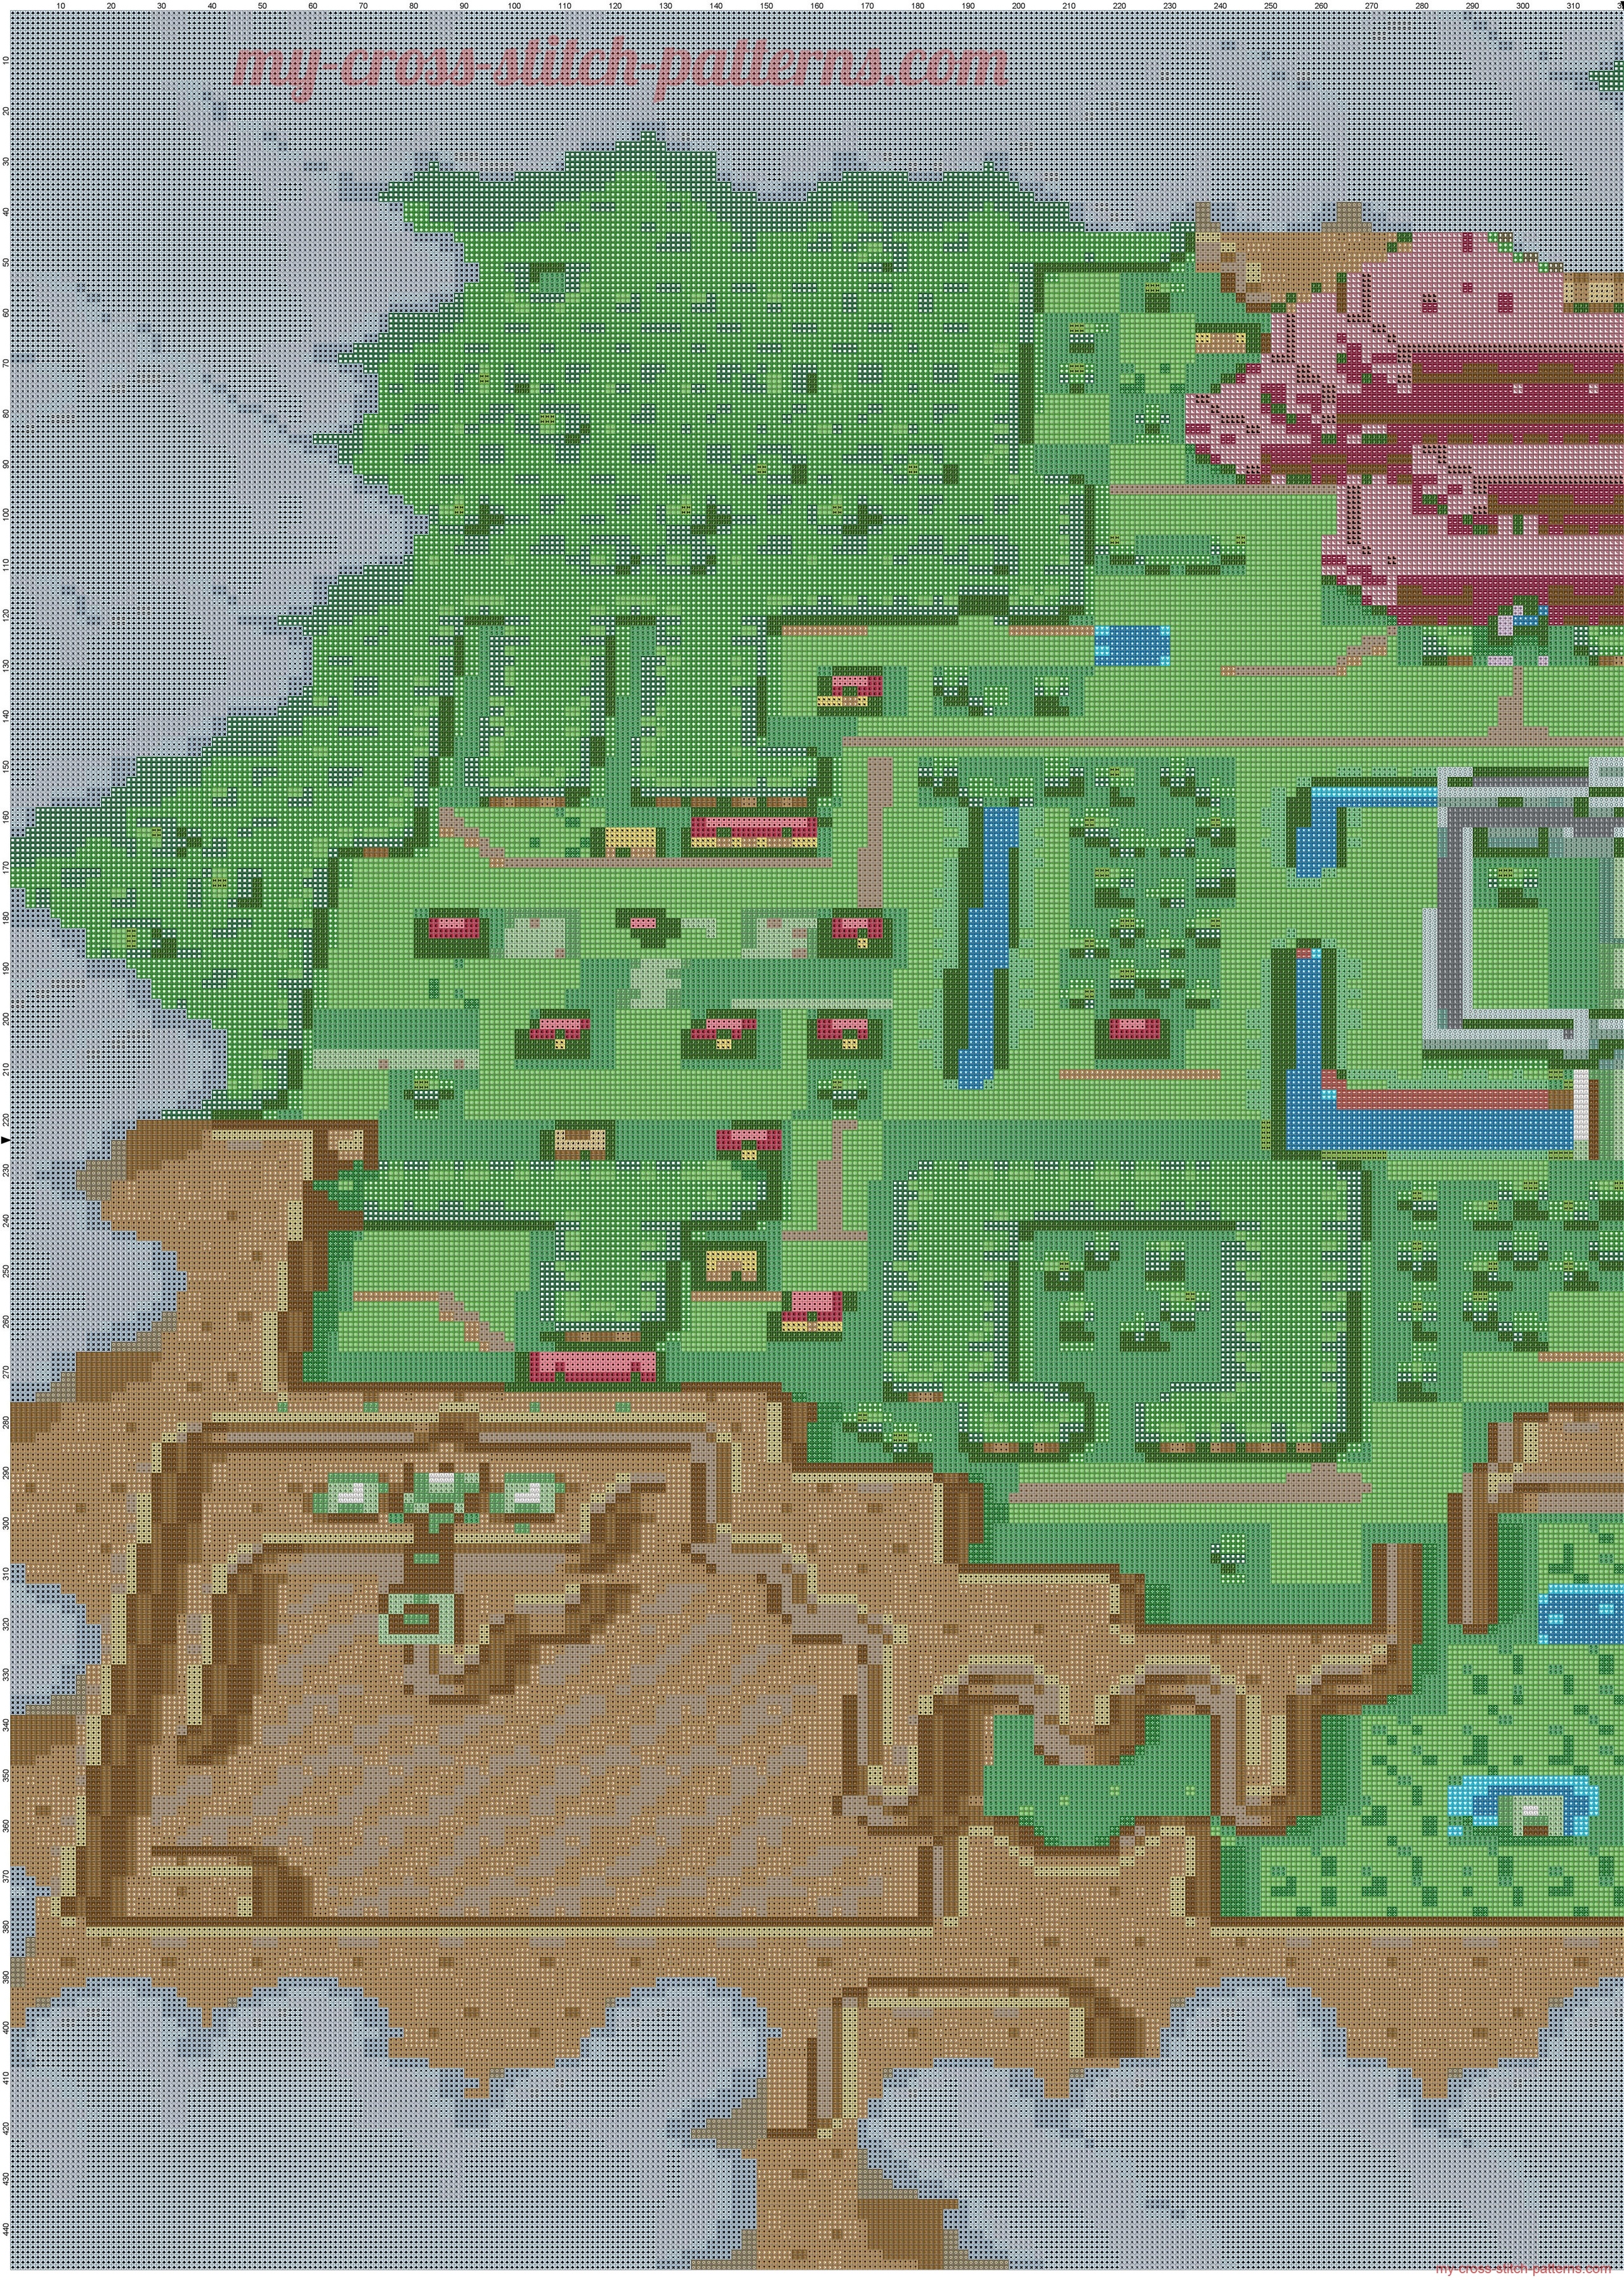 the_legend_of_zelda_a_link_to_the_past_map_cross_stitch_pattern_1